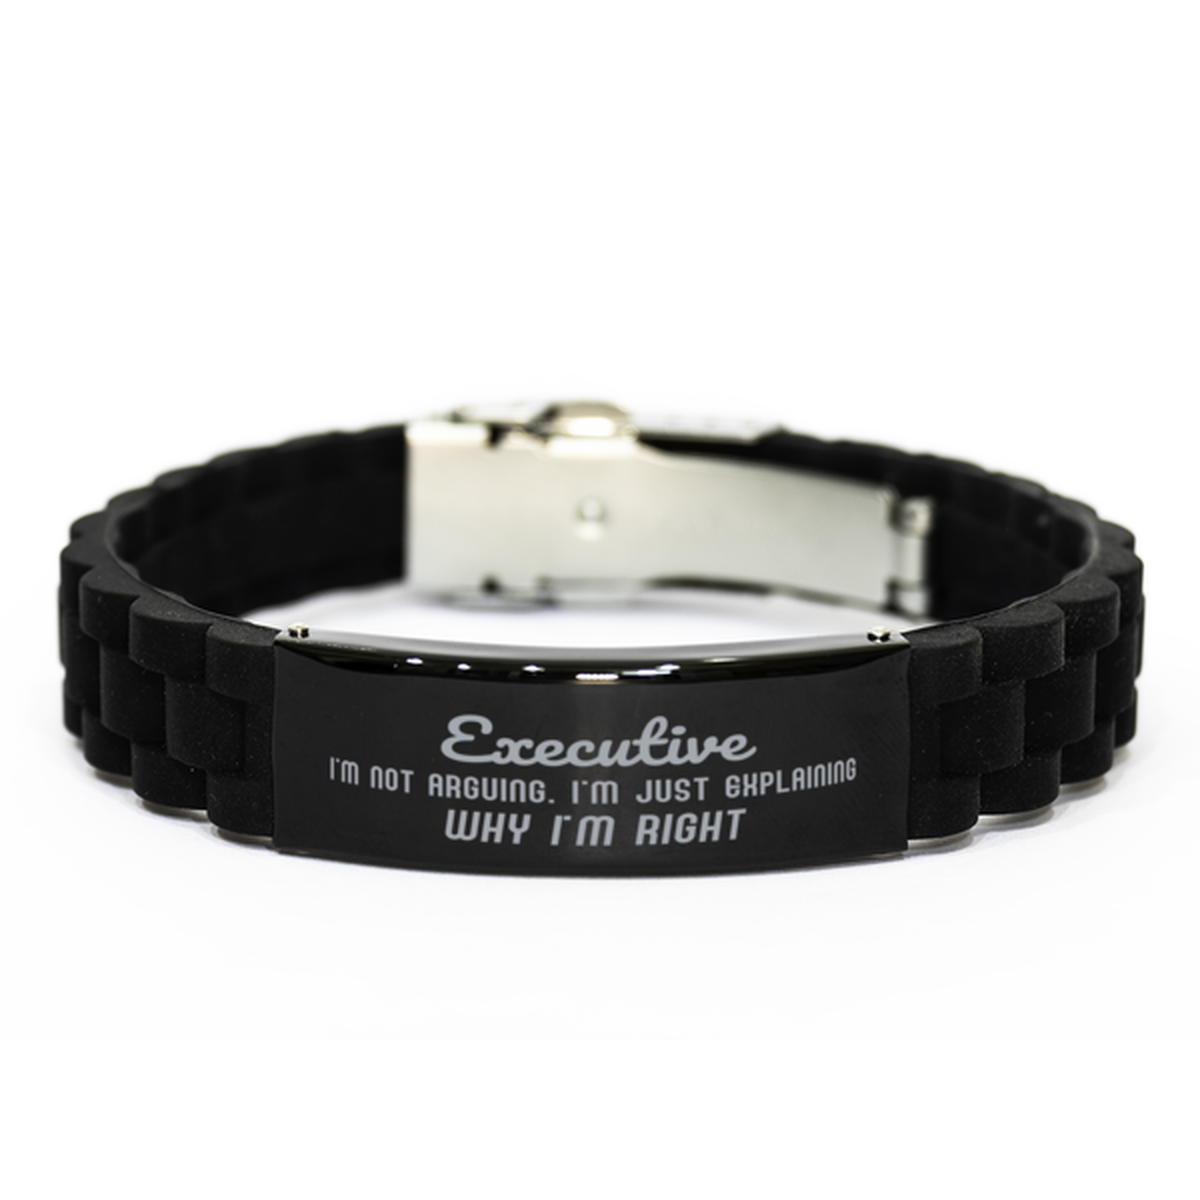 Executive I'm not Arguing. I'm Just Explaining Why I'm RIGHT Black Glidelock Clasp Bracelet, Funny Saying Quote Executive Gifts For Executive Graduation Birthday Christmas Gifts for Men Women Coworker